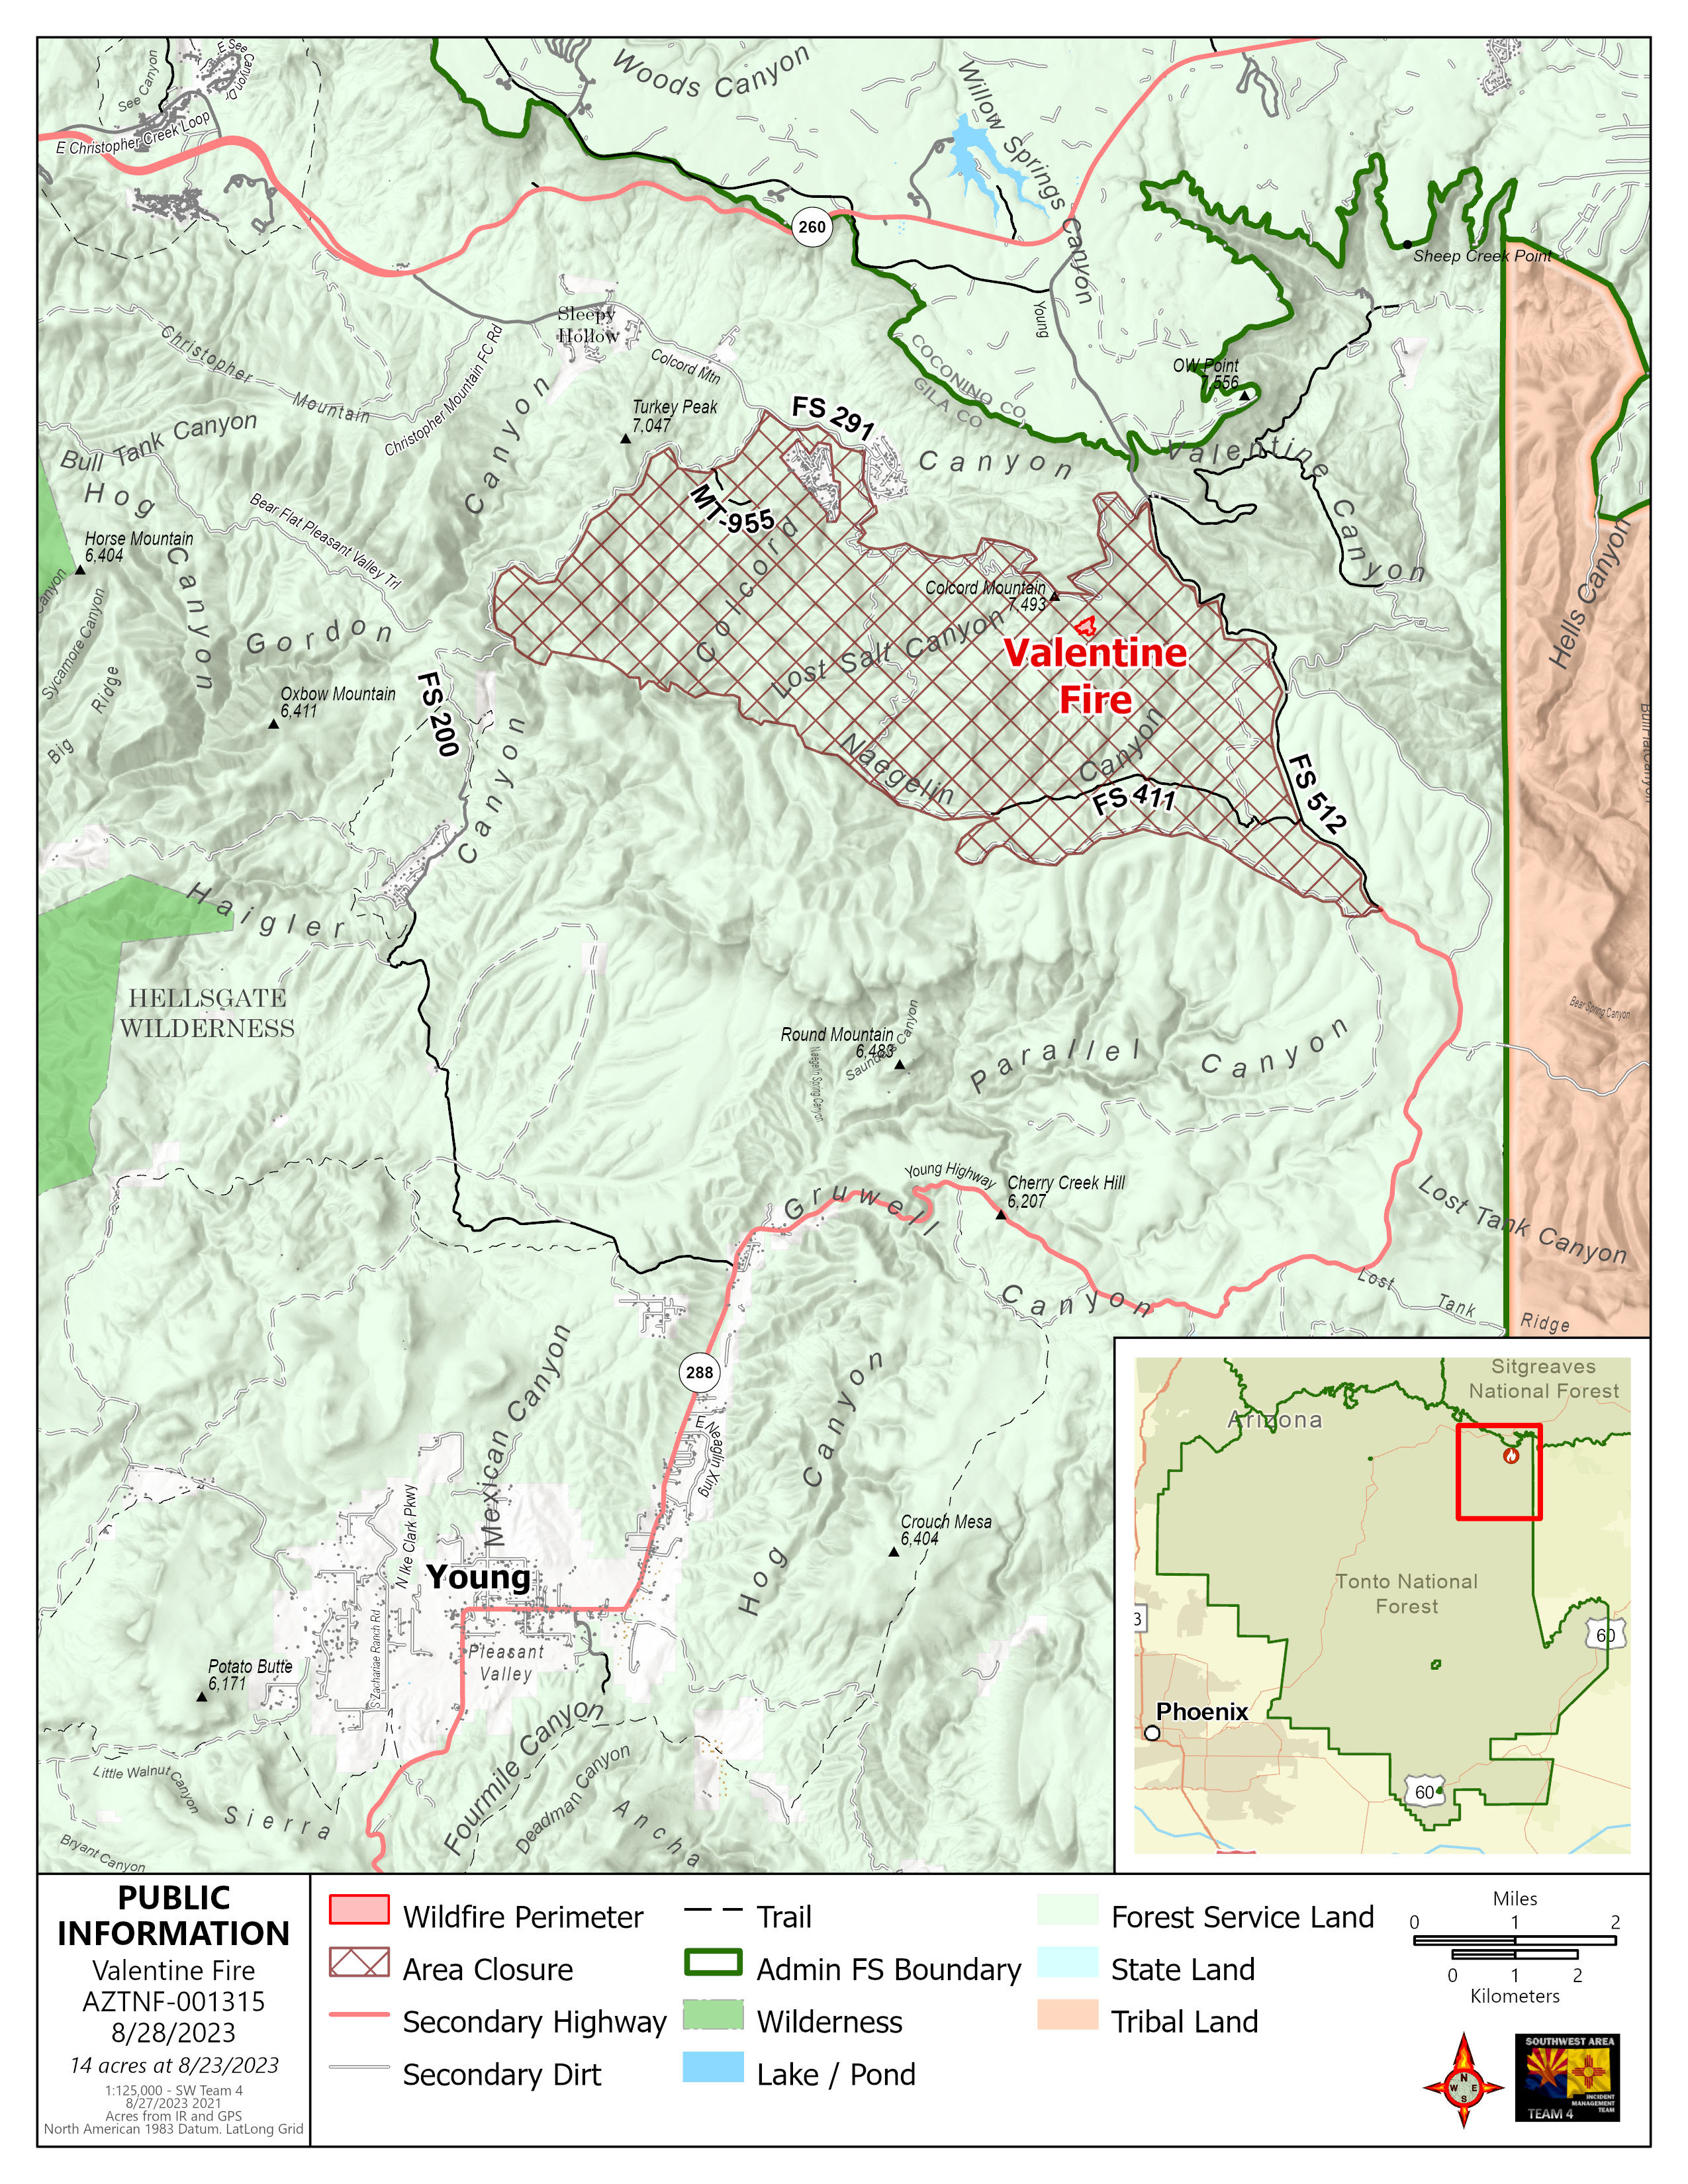 A map of the Valentine fire August 28 2023